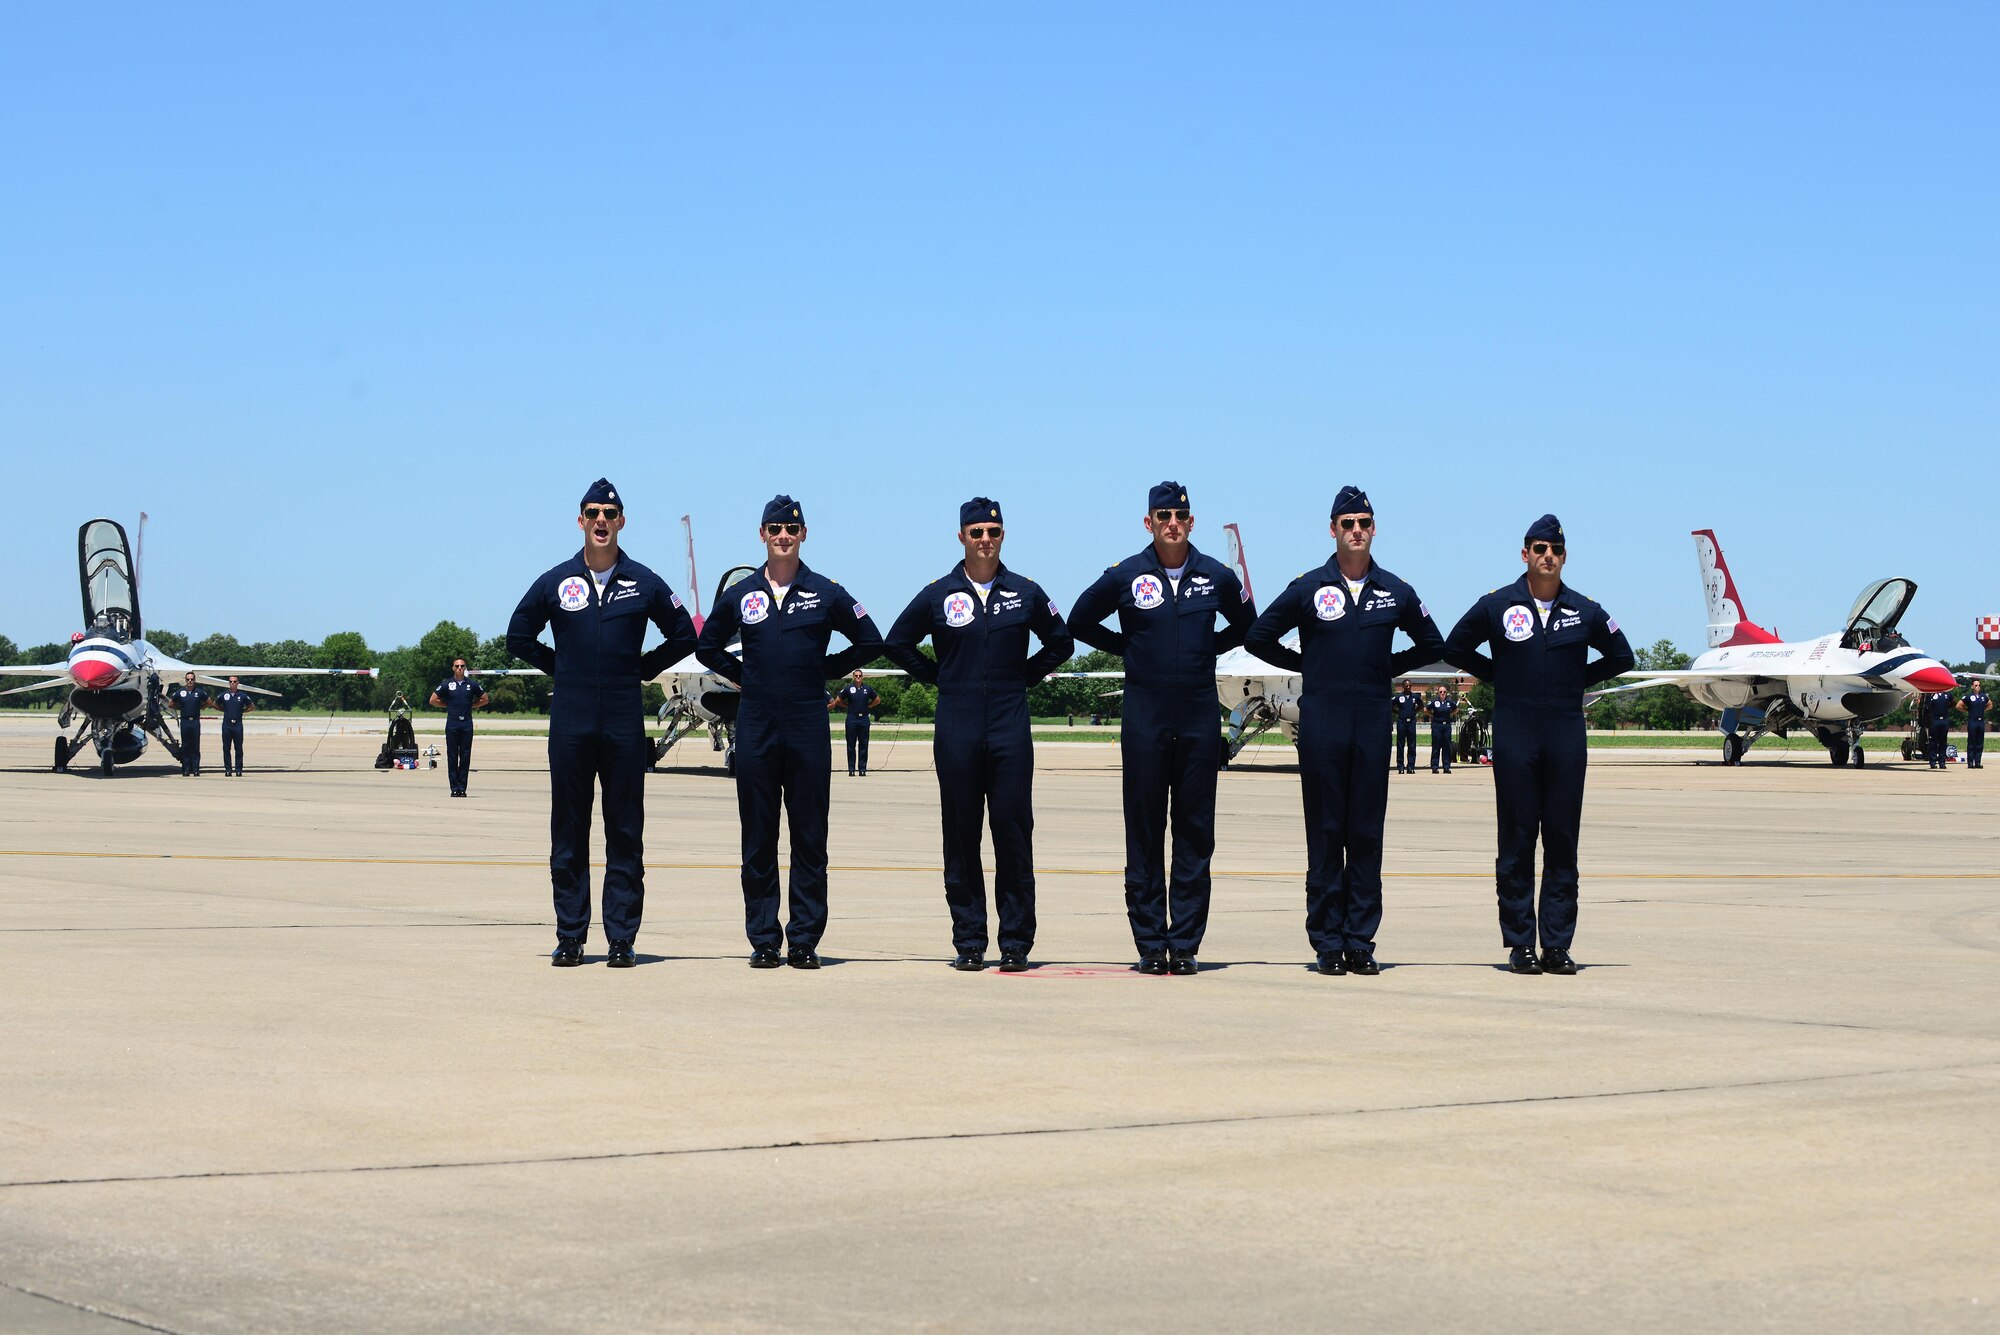 Thunderbird members perform a pre-show ground demonstration at Scott Air Force Base, Ill., June 9, 2017. The Thunderbirds, officially known as the U.S. Air Force Air Demonstration Squadron, performs precision aerial maneuvers to demonstrate the capabilities the F-16 Fighter Falcon, the Air Force’s premier multi-role fighter jet, Scott Air Force Base, Ill., June 9, 2017.   Eight highly experienced fighter pilots, four support officers, three civilians, and over 120 enlisted personnel help make it possible for the team to showcase the capabilities of this fighter jet to millions of people each year.  Together, this team has ensured that a demonstration has never been cancelled due to maintenance difficulty.  (U.S. Air Force photo by Tech. Sgt. Maria Castle)